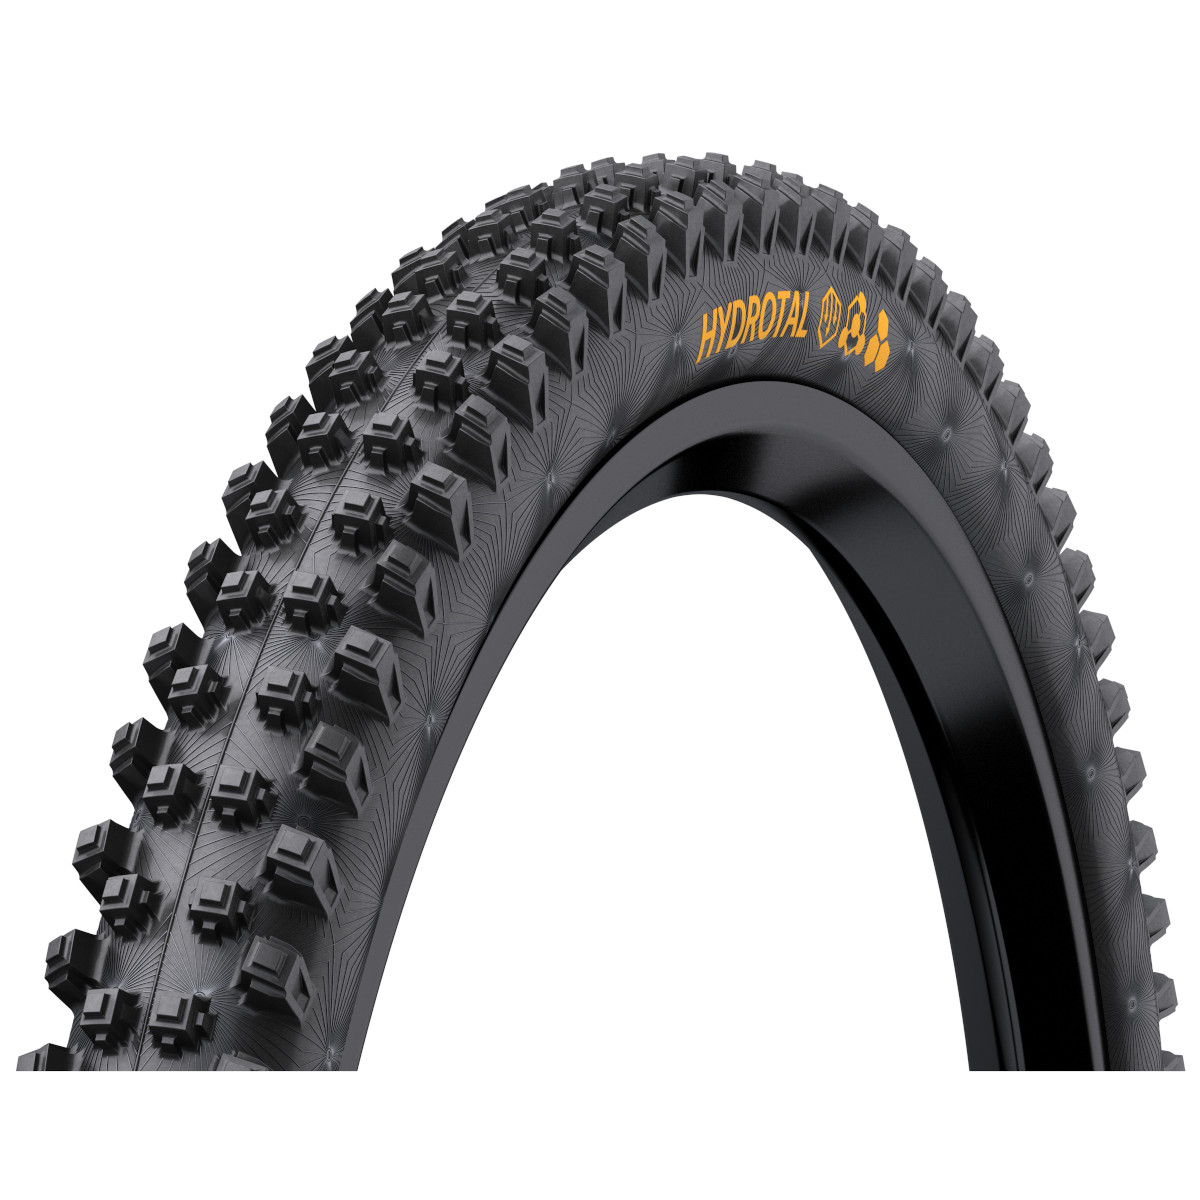 Productfoto van Continental Hydrotal - Downhill SuperSoft - MTB Vouwband - 27.5x2.40&quot;